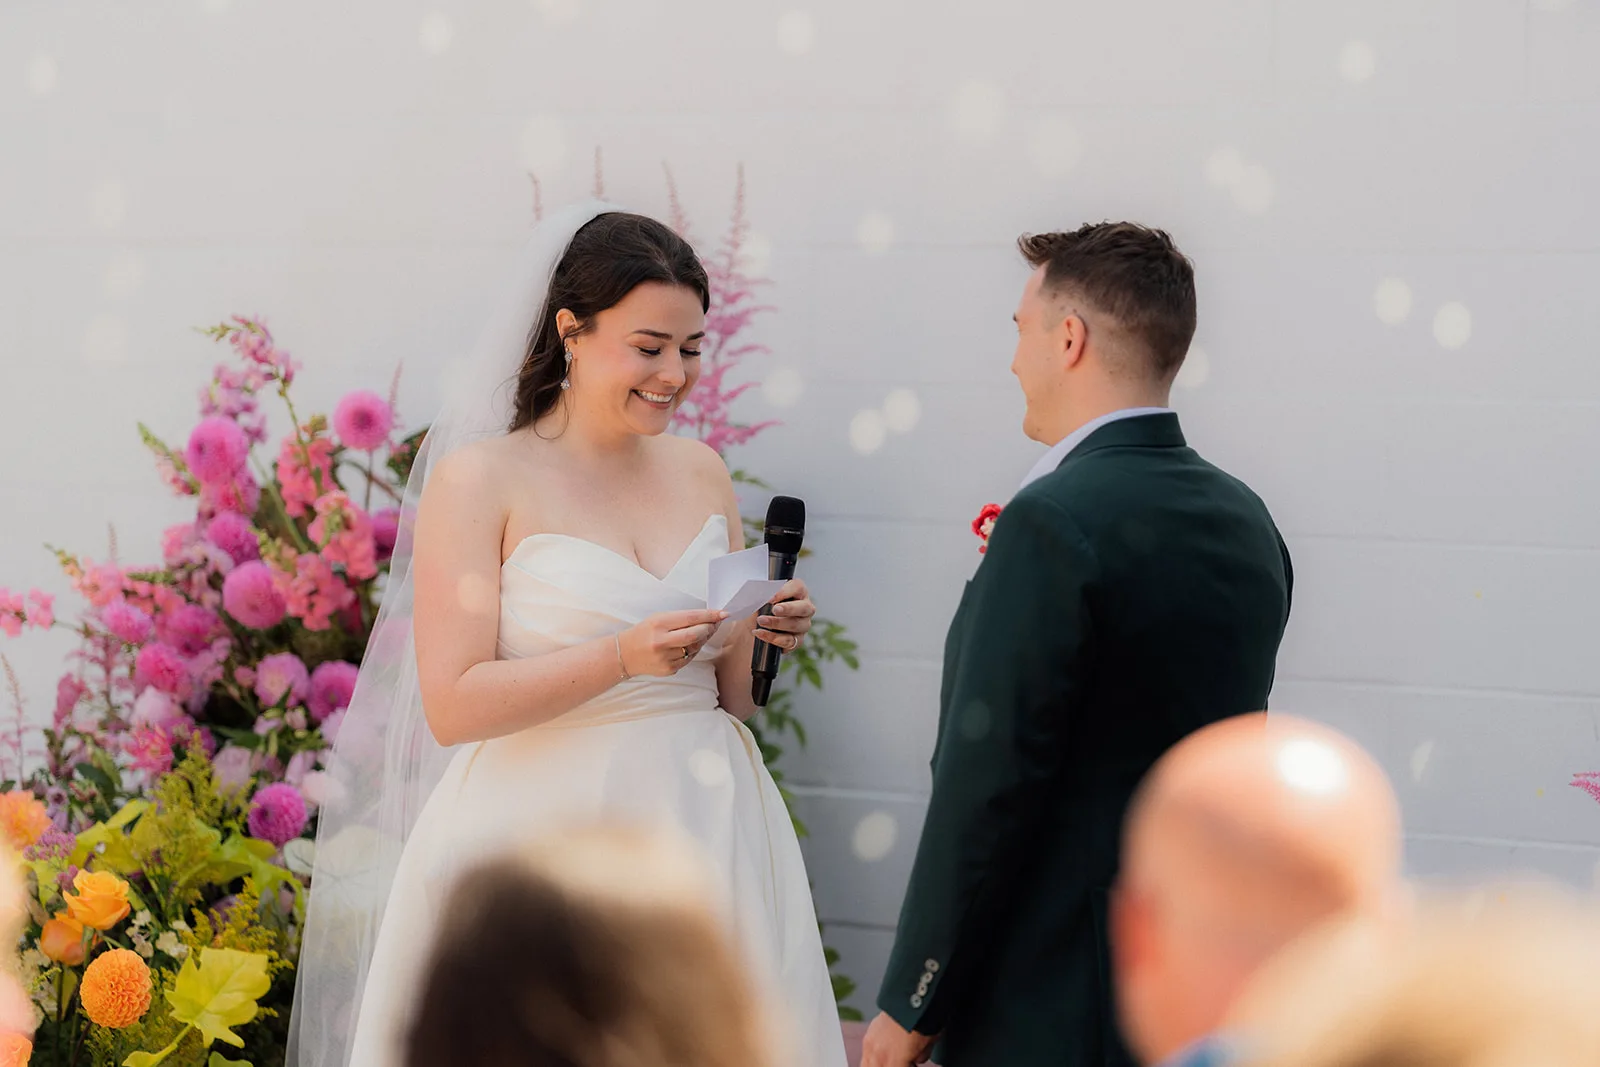 Couple exchanging vows during their wedding ceremony